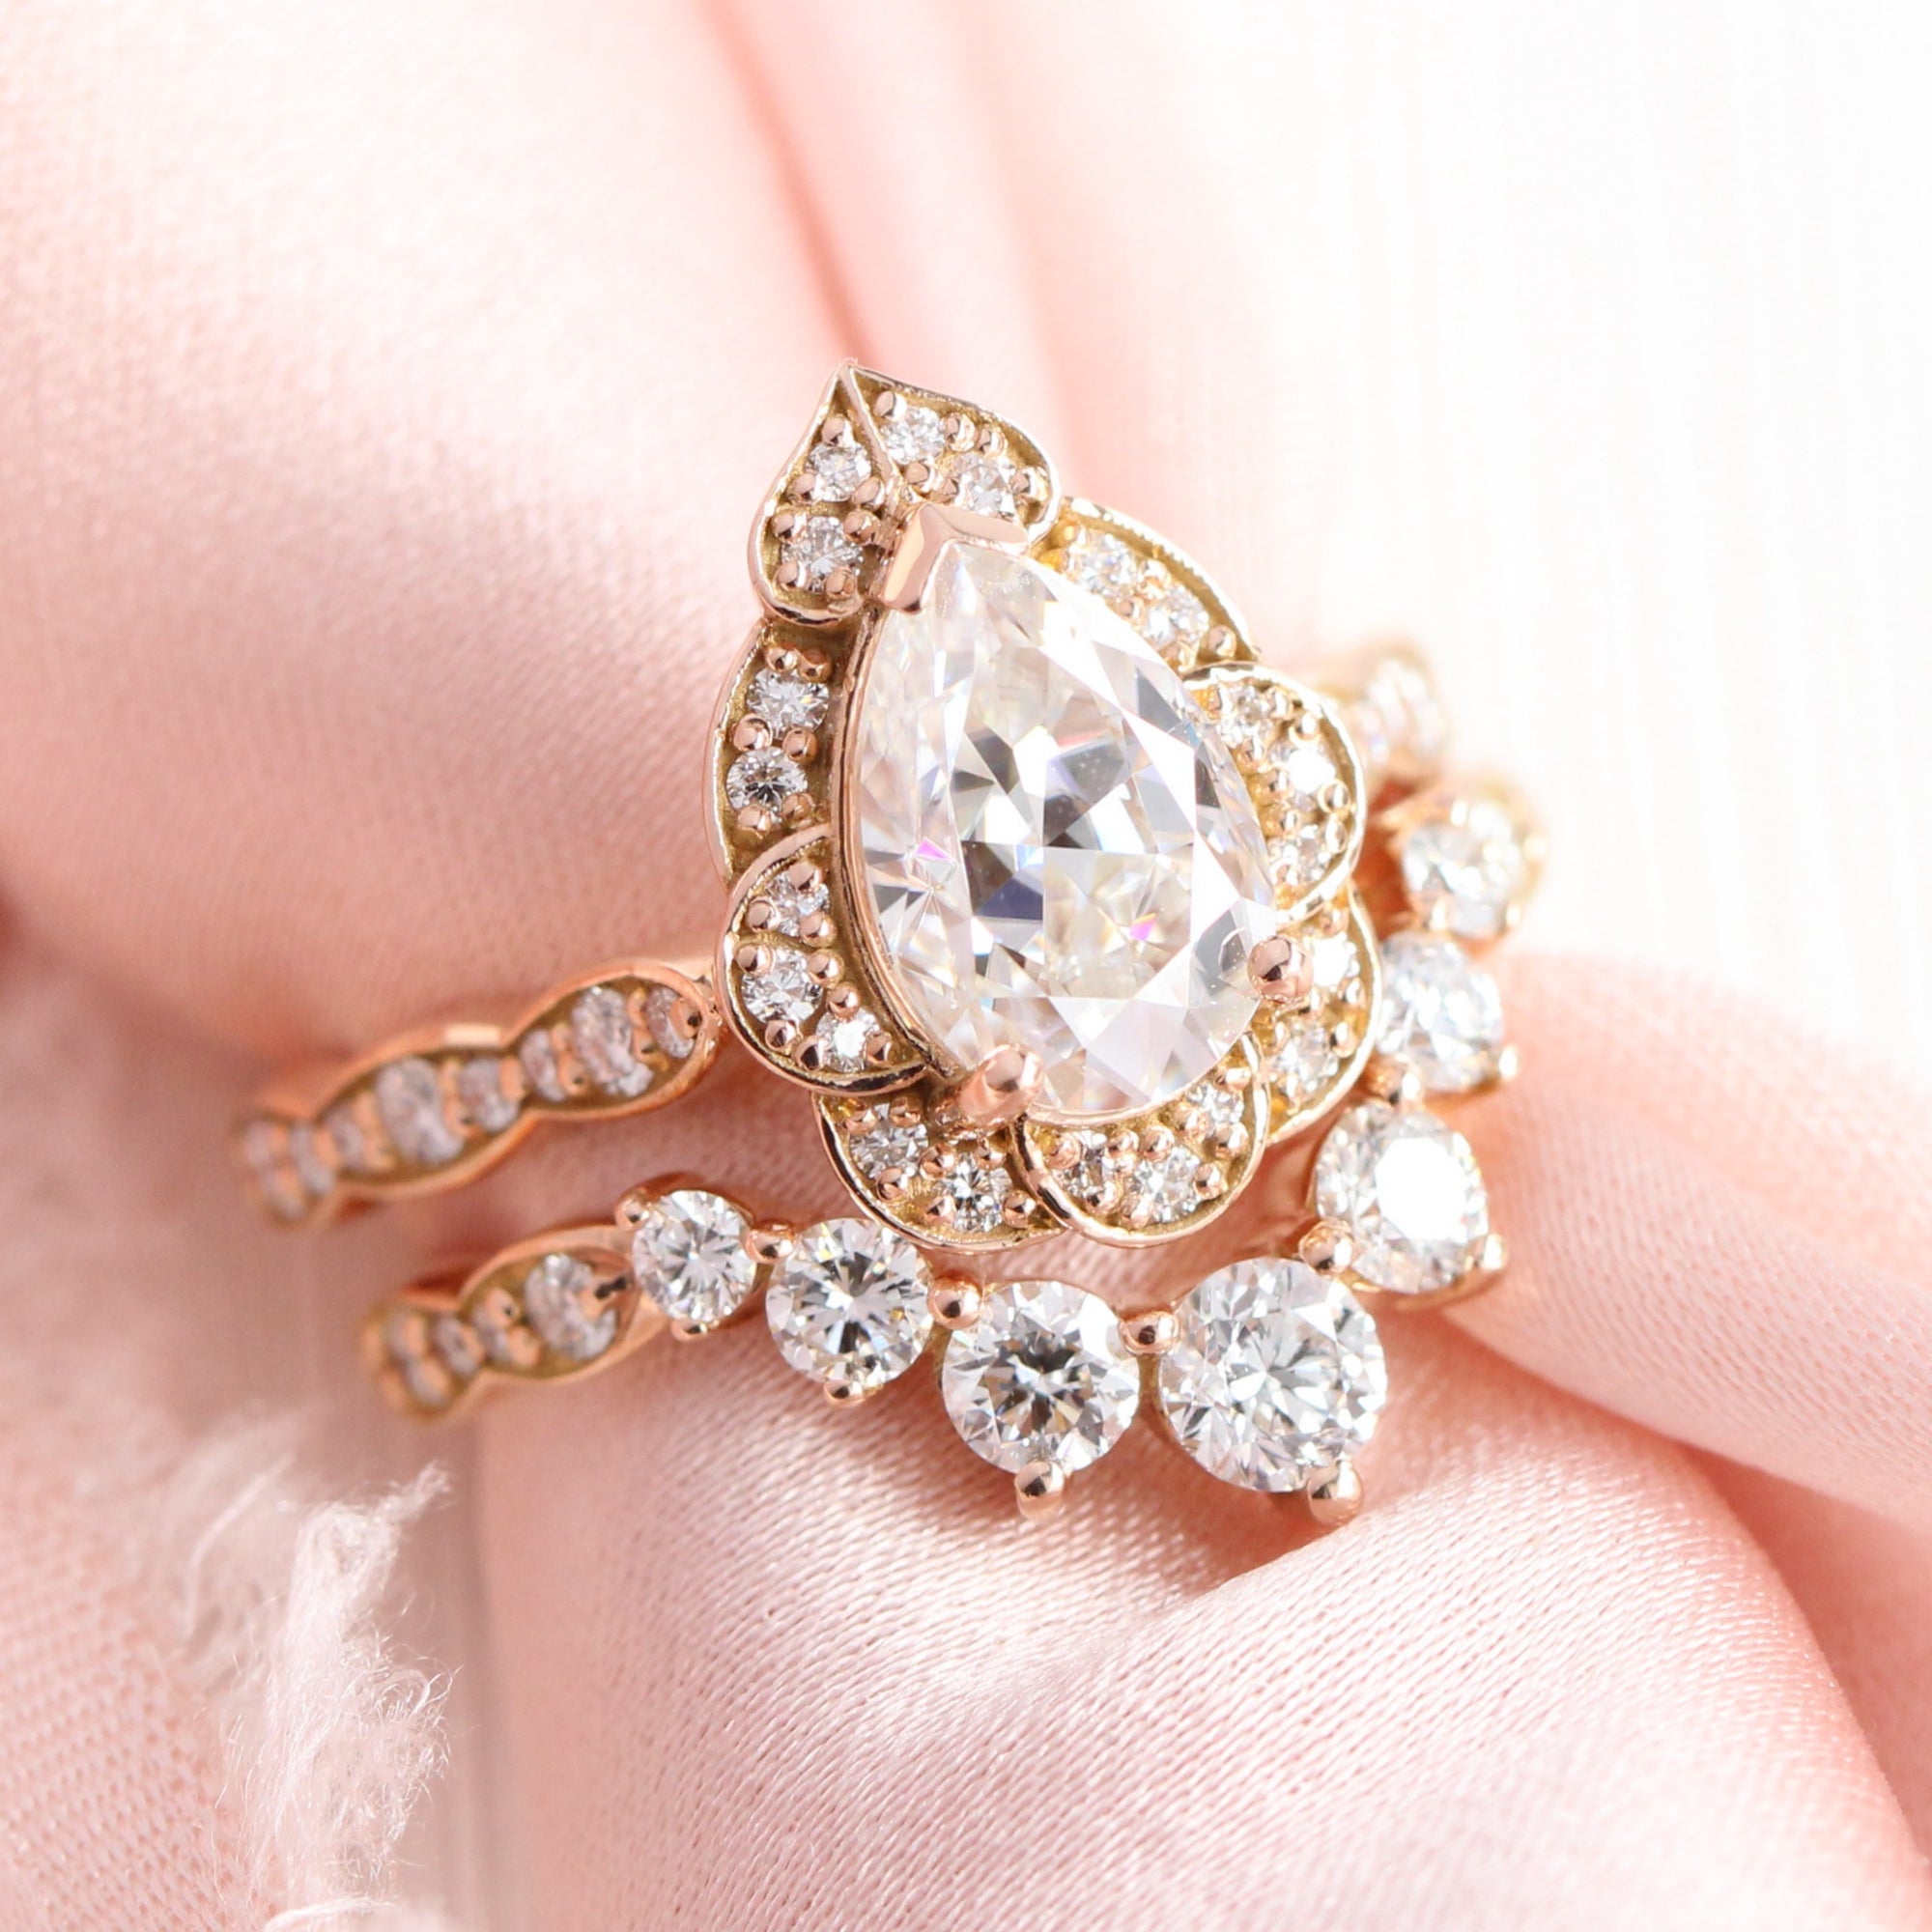 How to Wear an Engagement Ring & Wedding Band